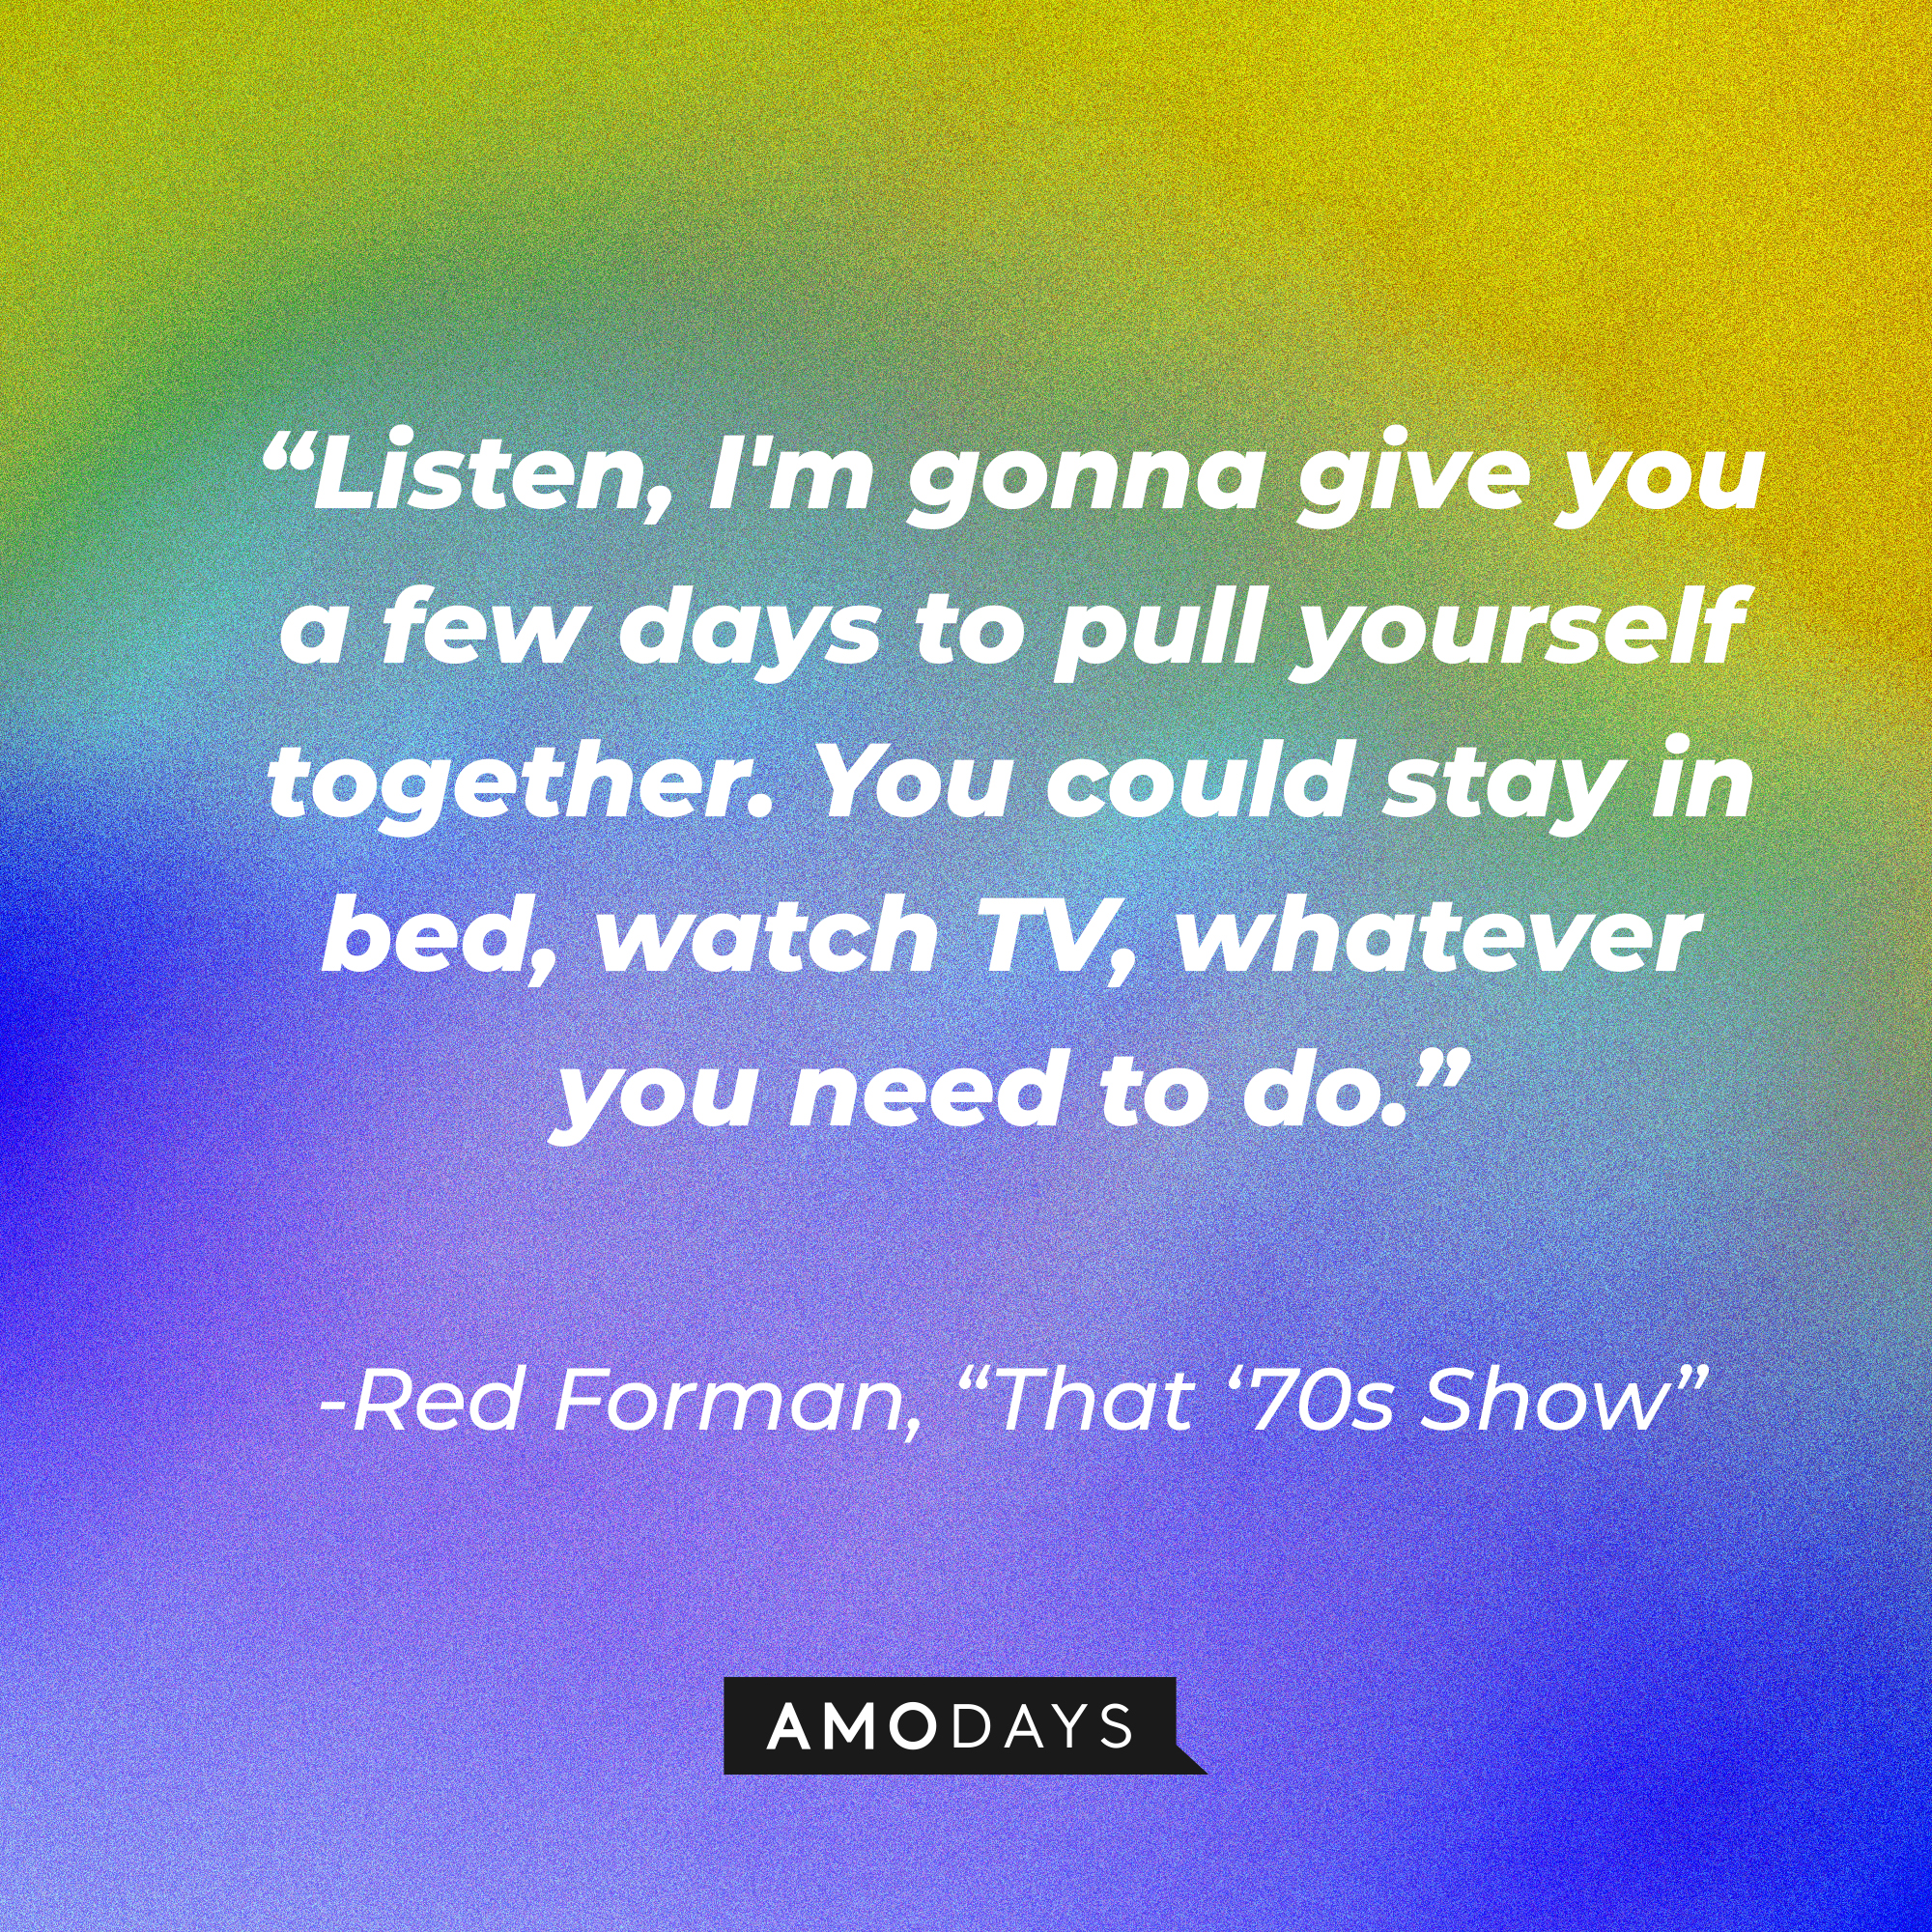 Red Forman's quote from "That '70s Show:" "Listen, I'm gonna give you a few days to pull yourself together. You could stay in bed, watch TV, whatever you need to do." | Source: AmoDays